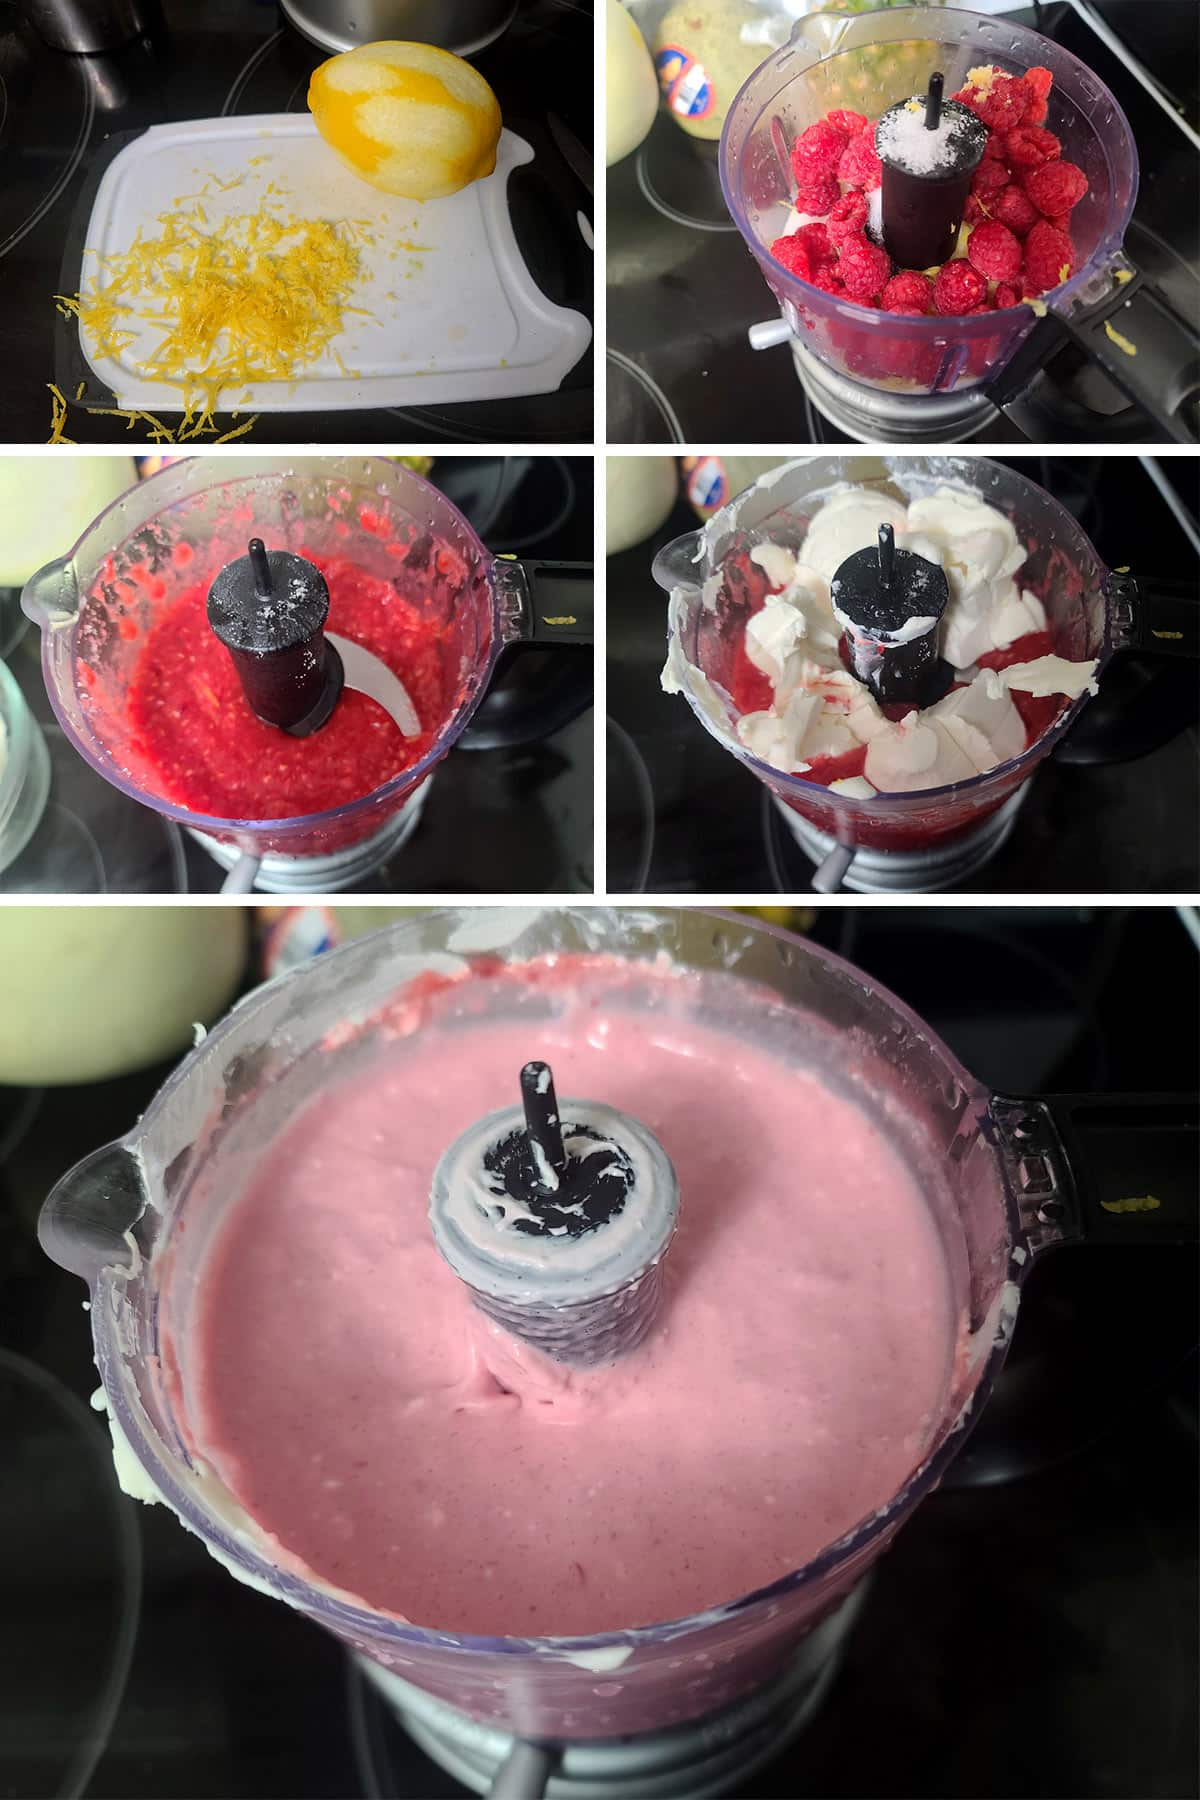 A 5 part image showing the lemon being zested, the raspberries pureed with the sugar, and the cream cheese blended in.